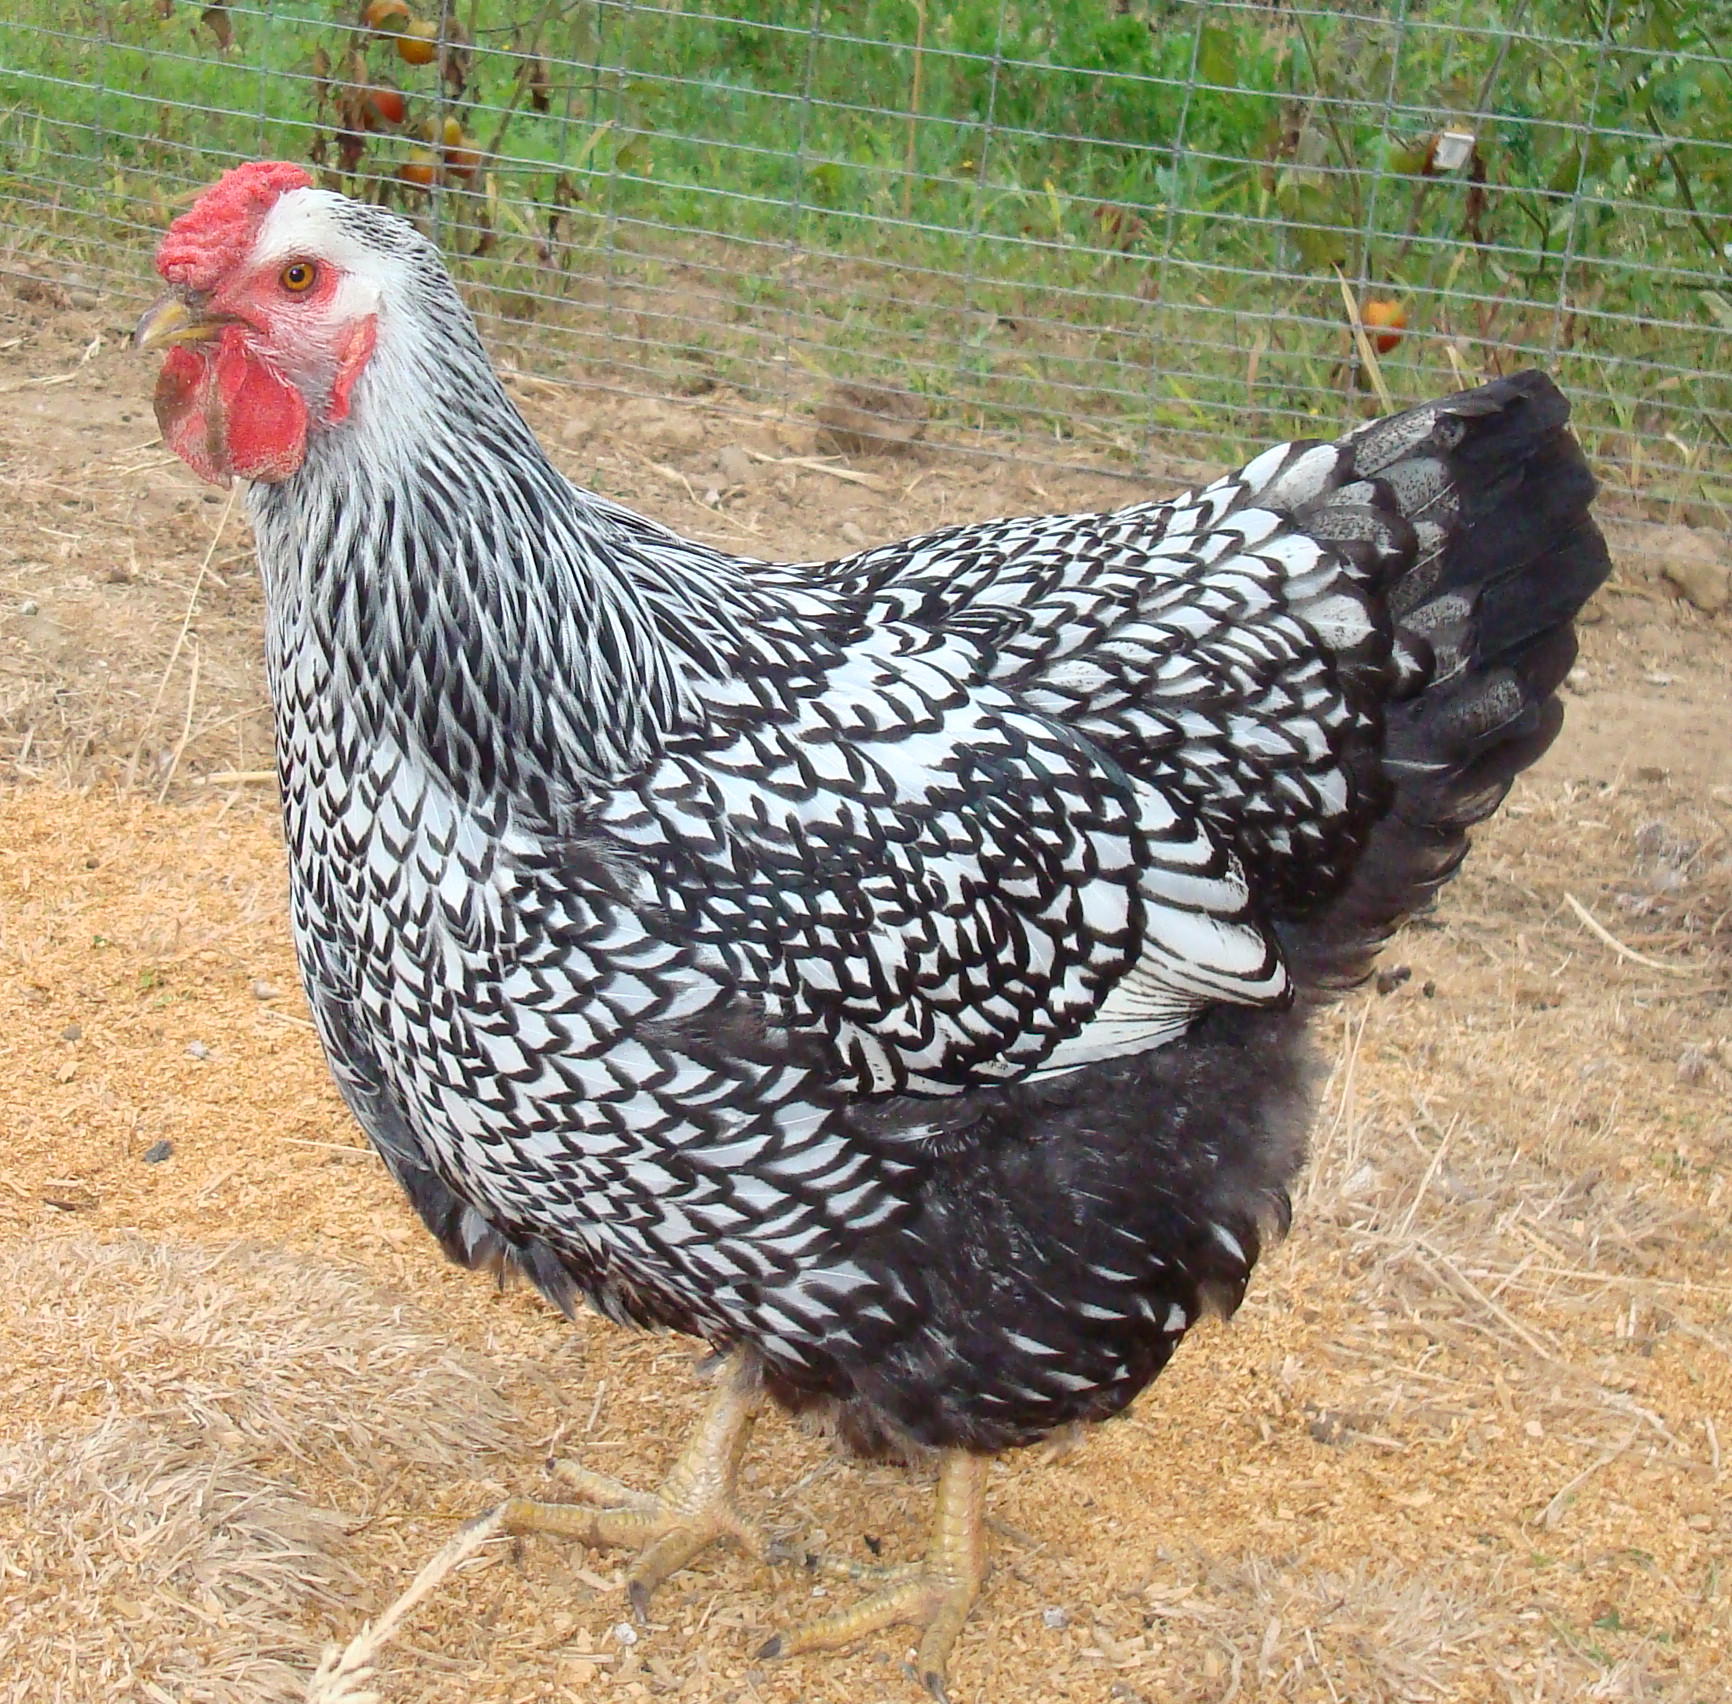 This is Dottie. She was such a docile, wonderful girl. She died on Christmas morning, of what I have no idea. I loved her, but she laid funny torpedo shaped eggs.